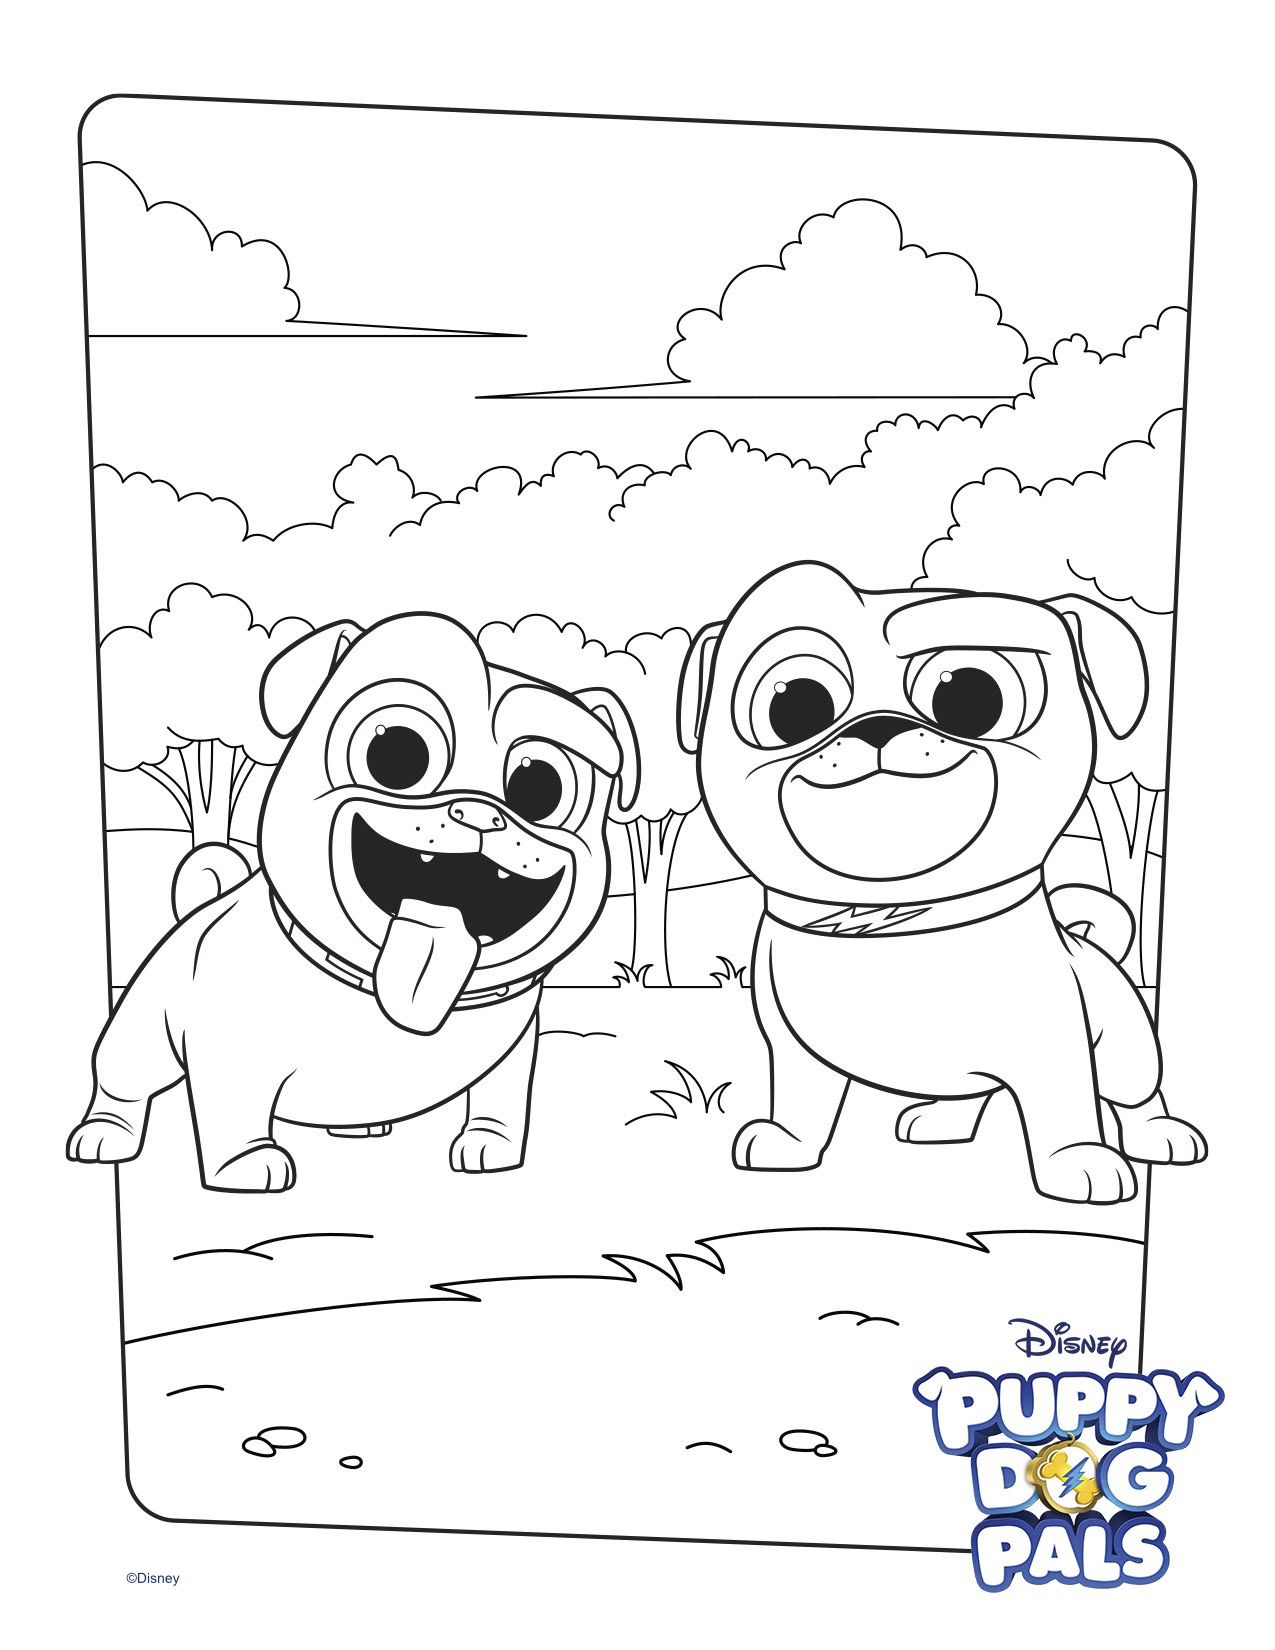 Convert Pictures To Coloring Pages Coloring Ideas Convert Photo To Coloring Page Free Chibi Crayola